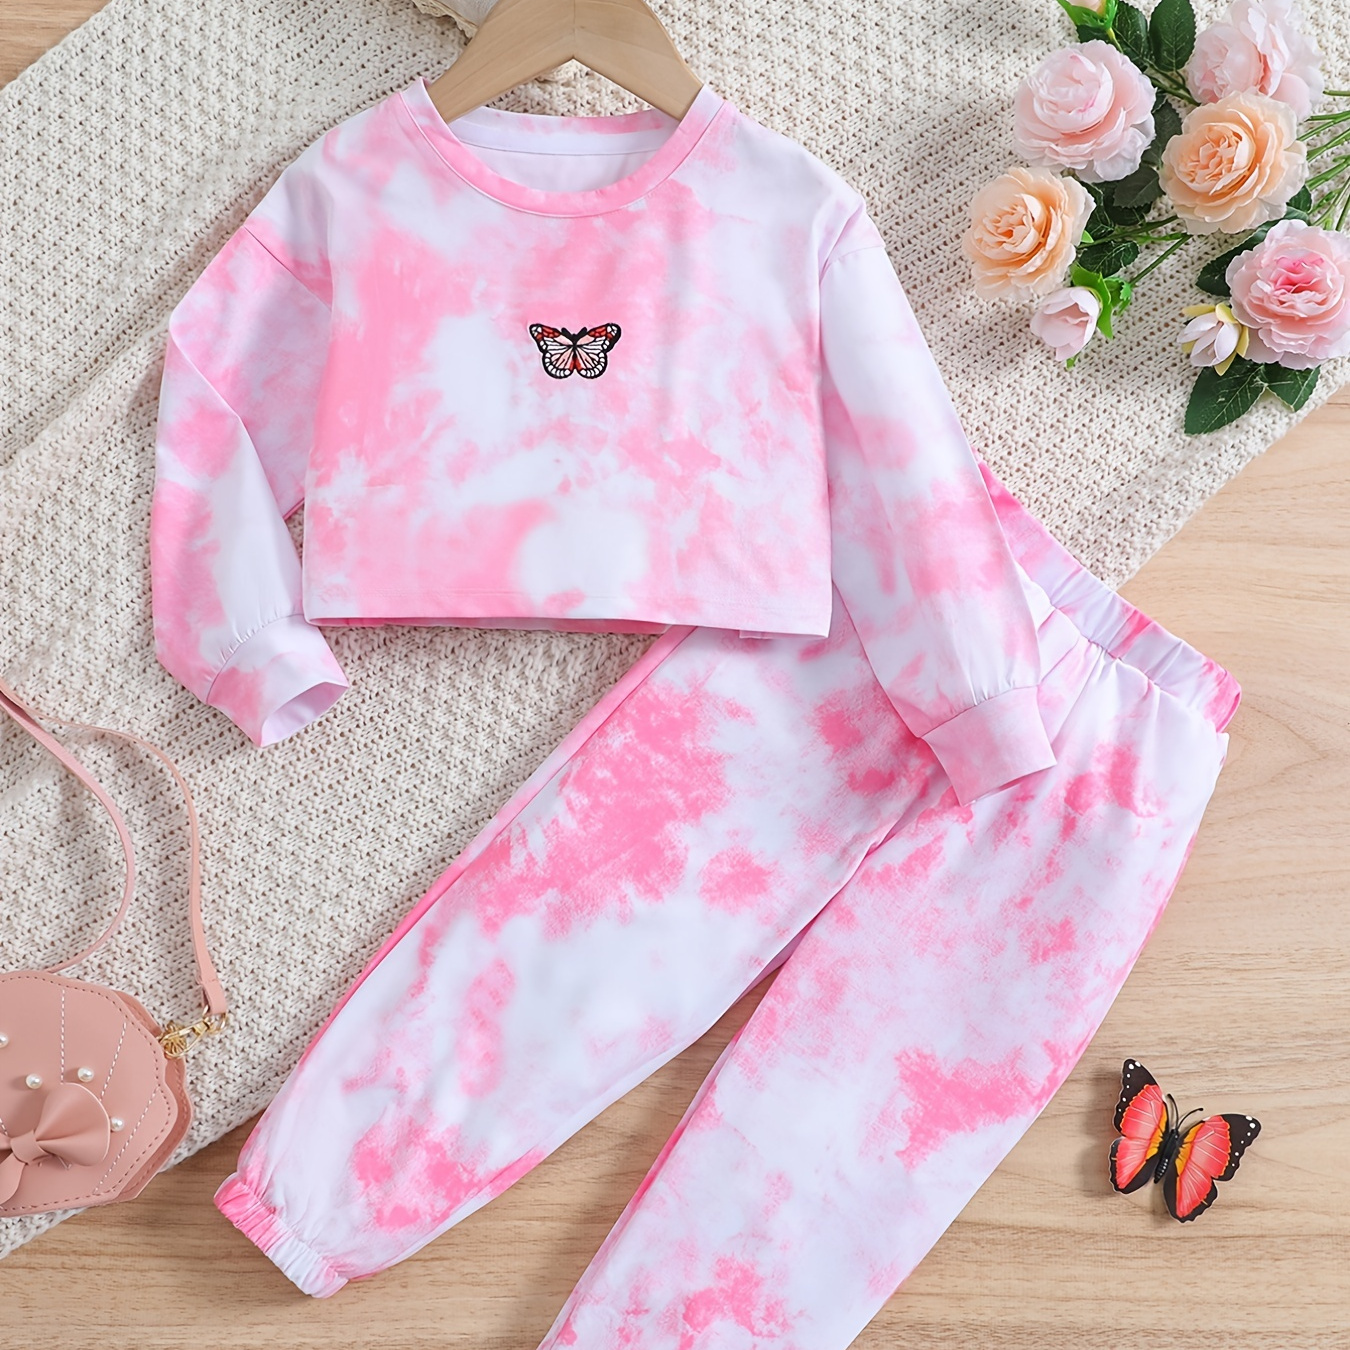 

Toddler Girls Butterfly Embroidery Tie Dye Top Long Sleeve Tee Shirt And Sweat Pants 2pcs Sportswears Y1-y8